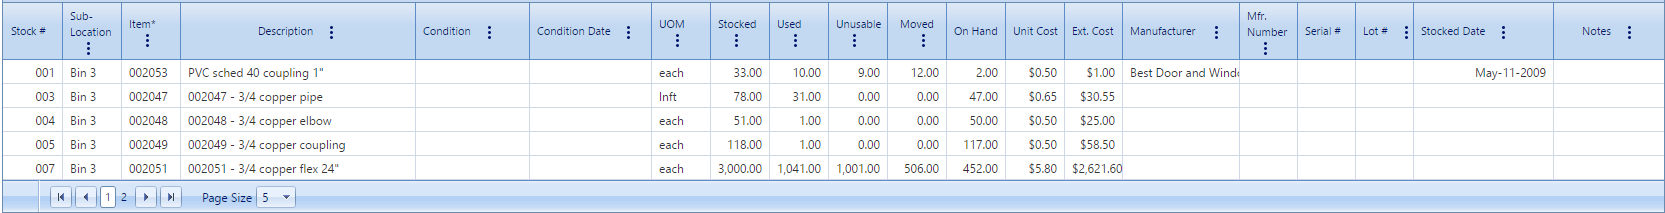 4. Inventory Locations Stock Table